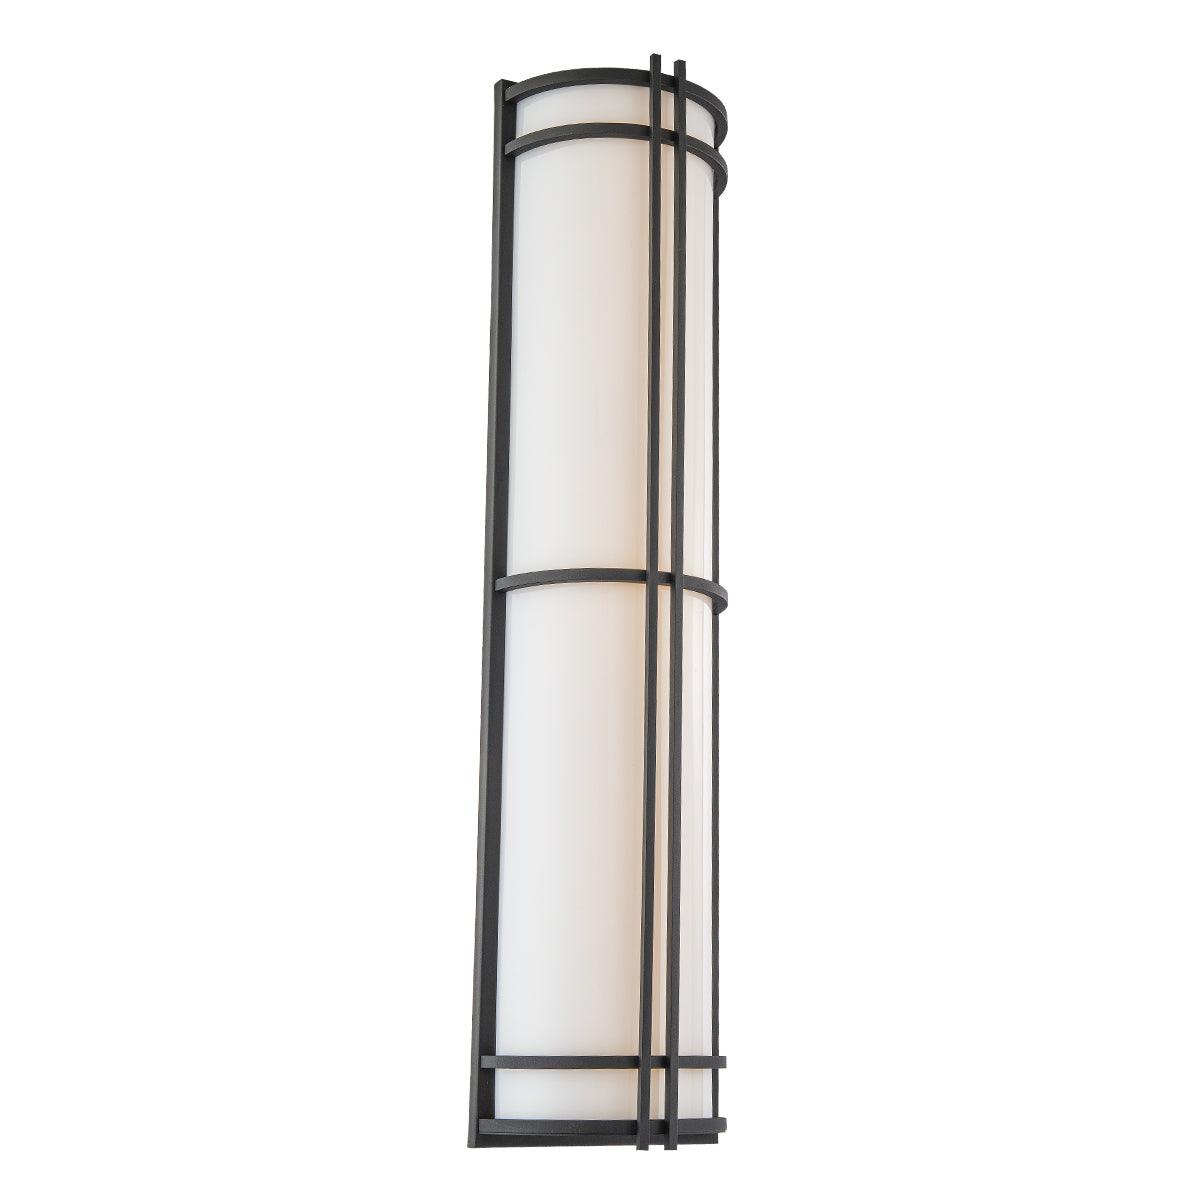 Modern Forms - Skyscraper LED Outdoor Wall Mount - WS-W68637-BK | Montreal Lighting & Hardware